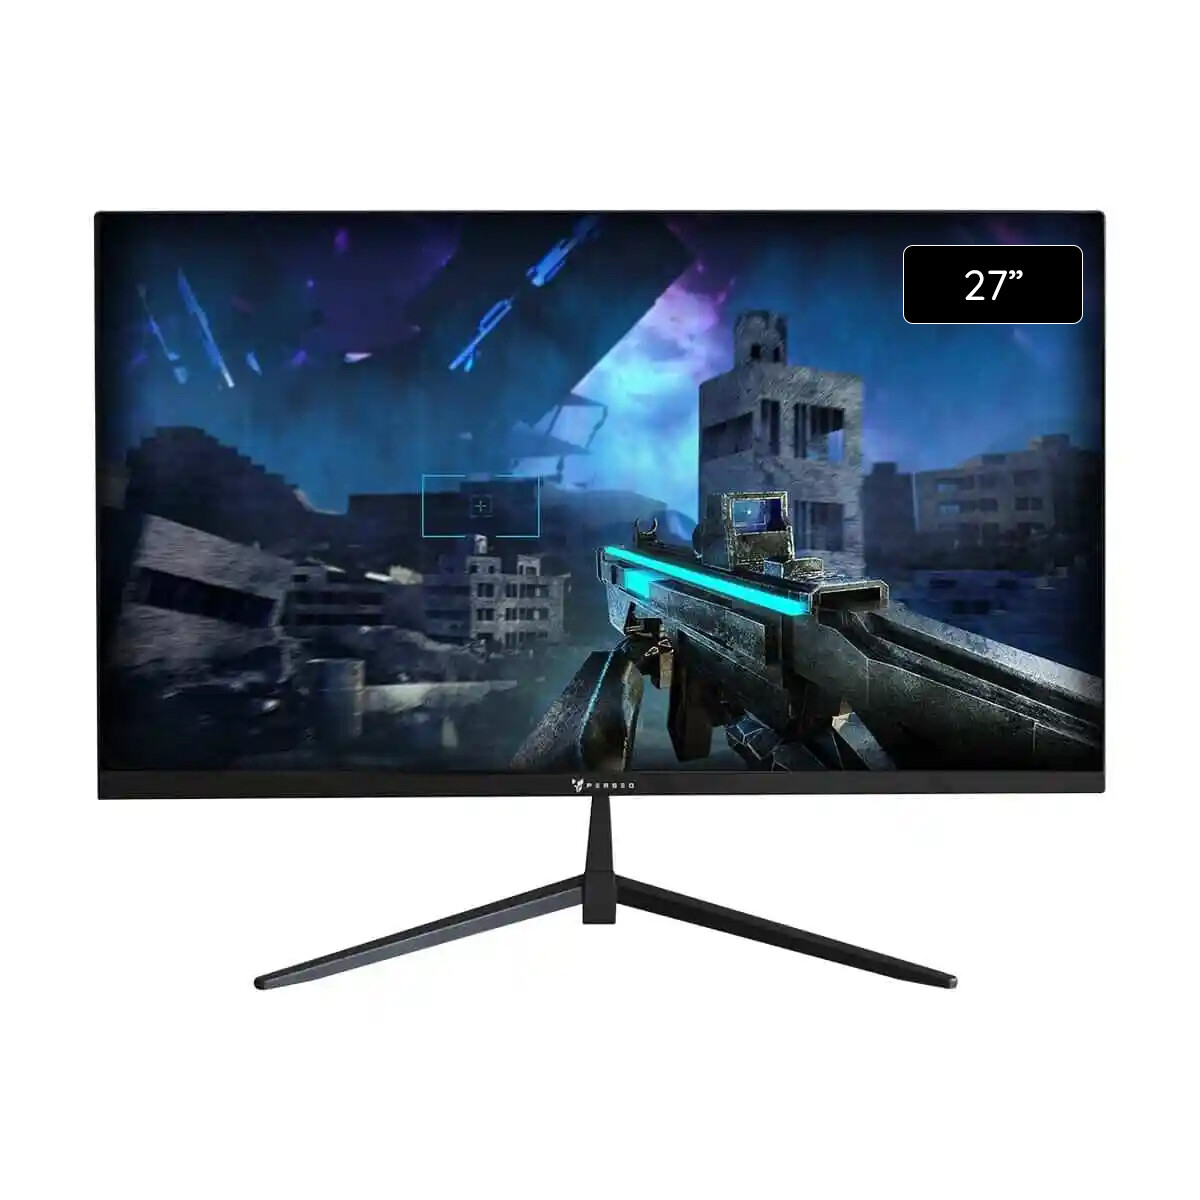 Monitor Gamer Perseo Hermes 27" Fhd 200hz 1MS Black